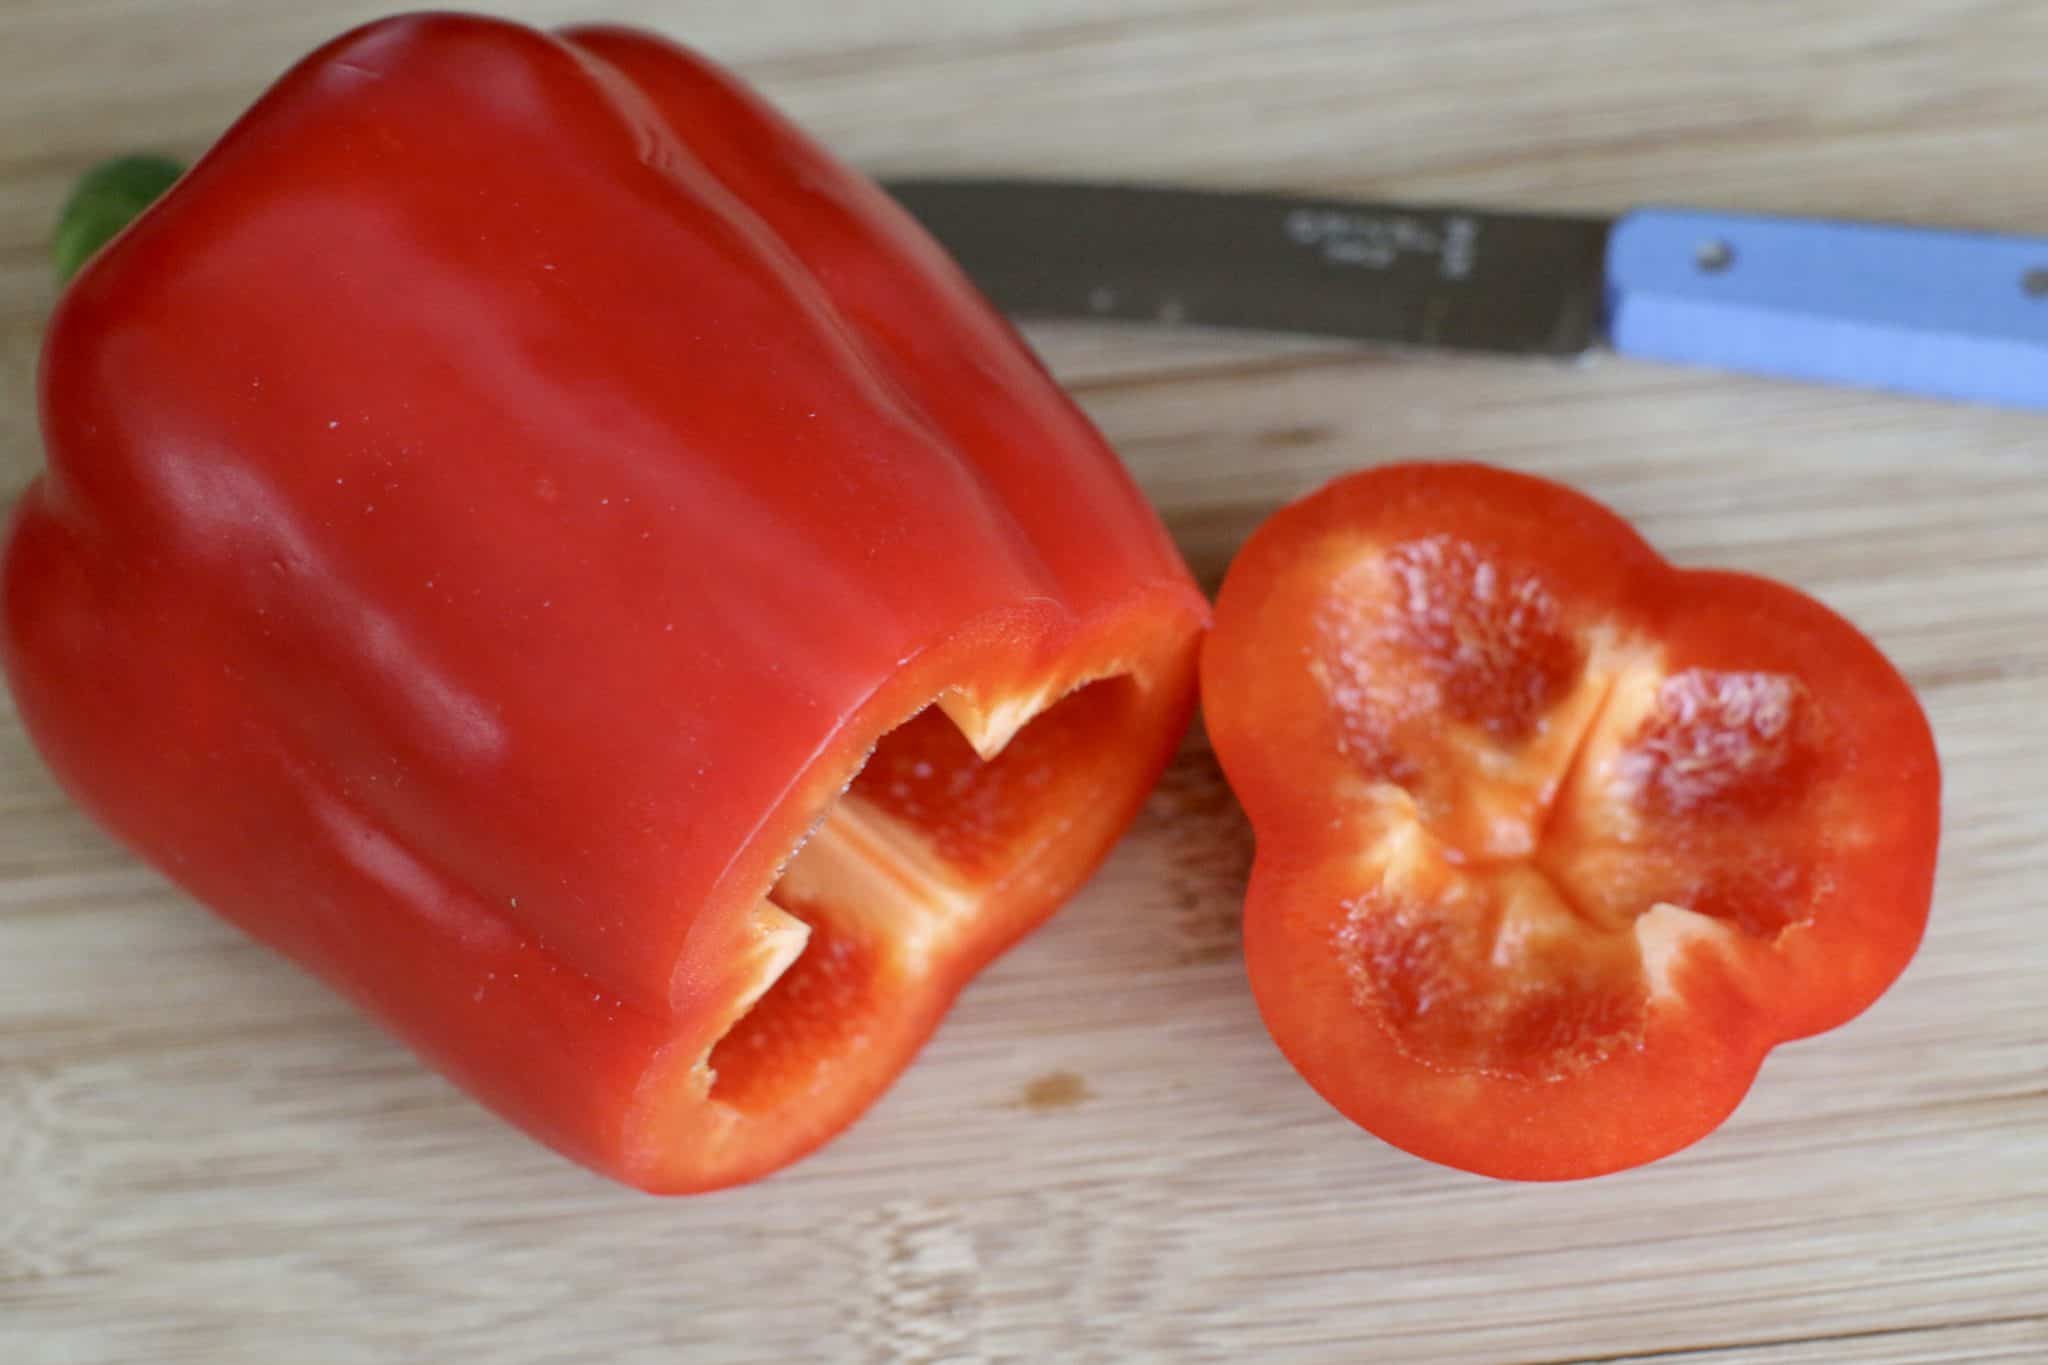 the end of a red pepper sliced off.